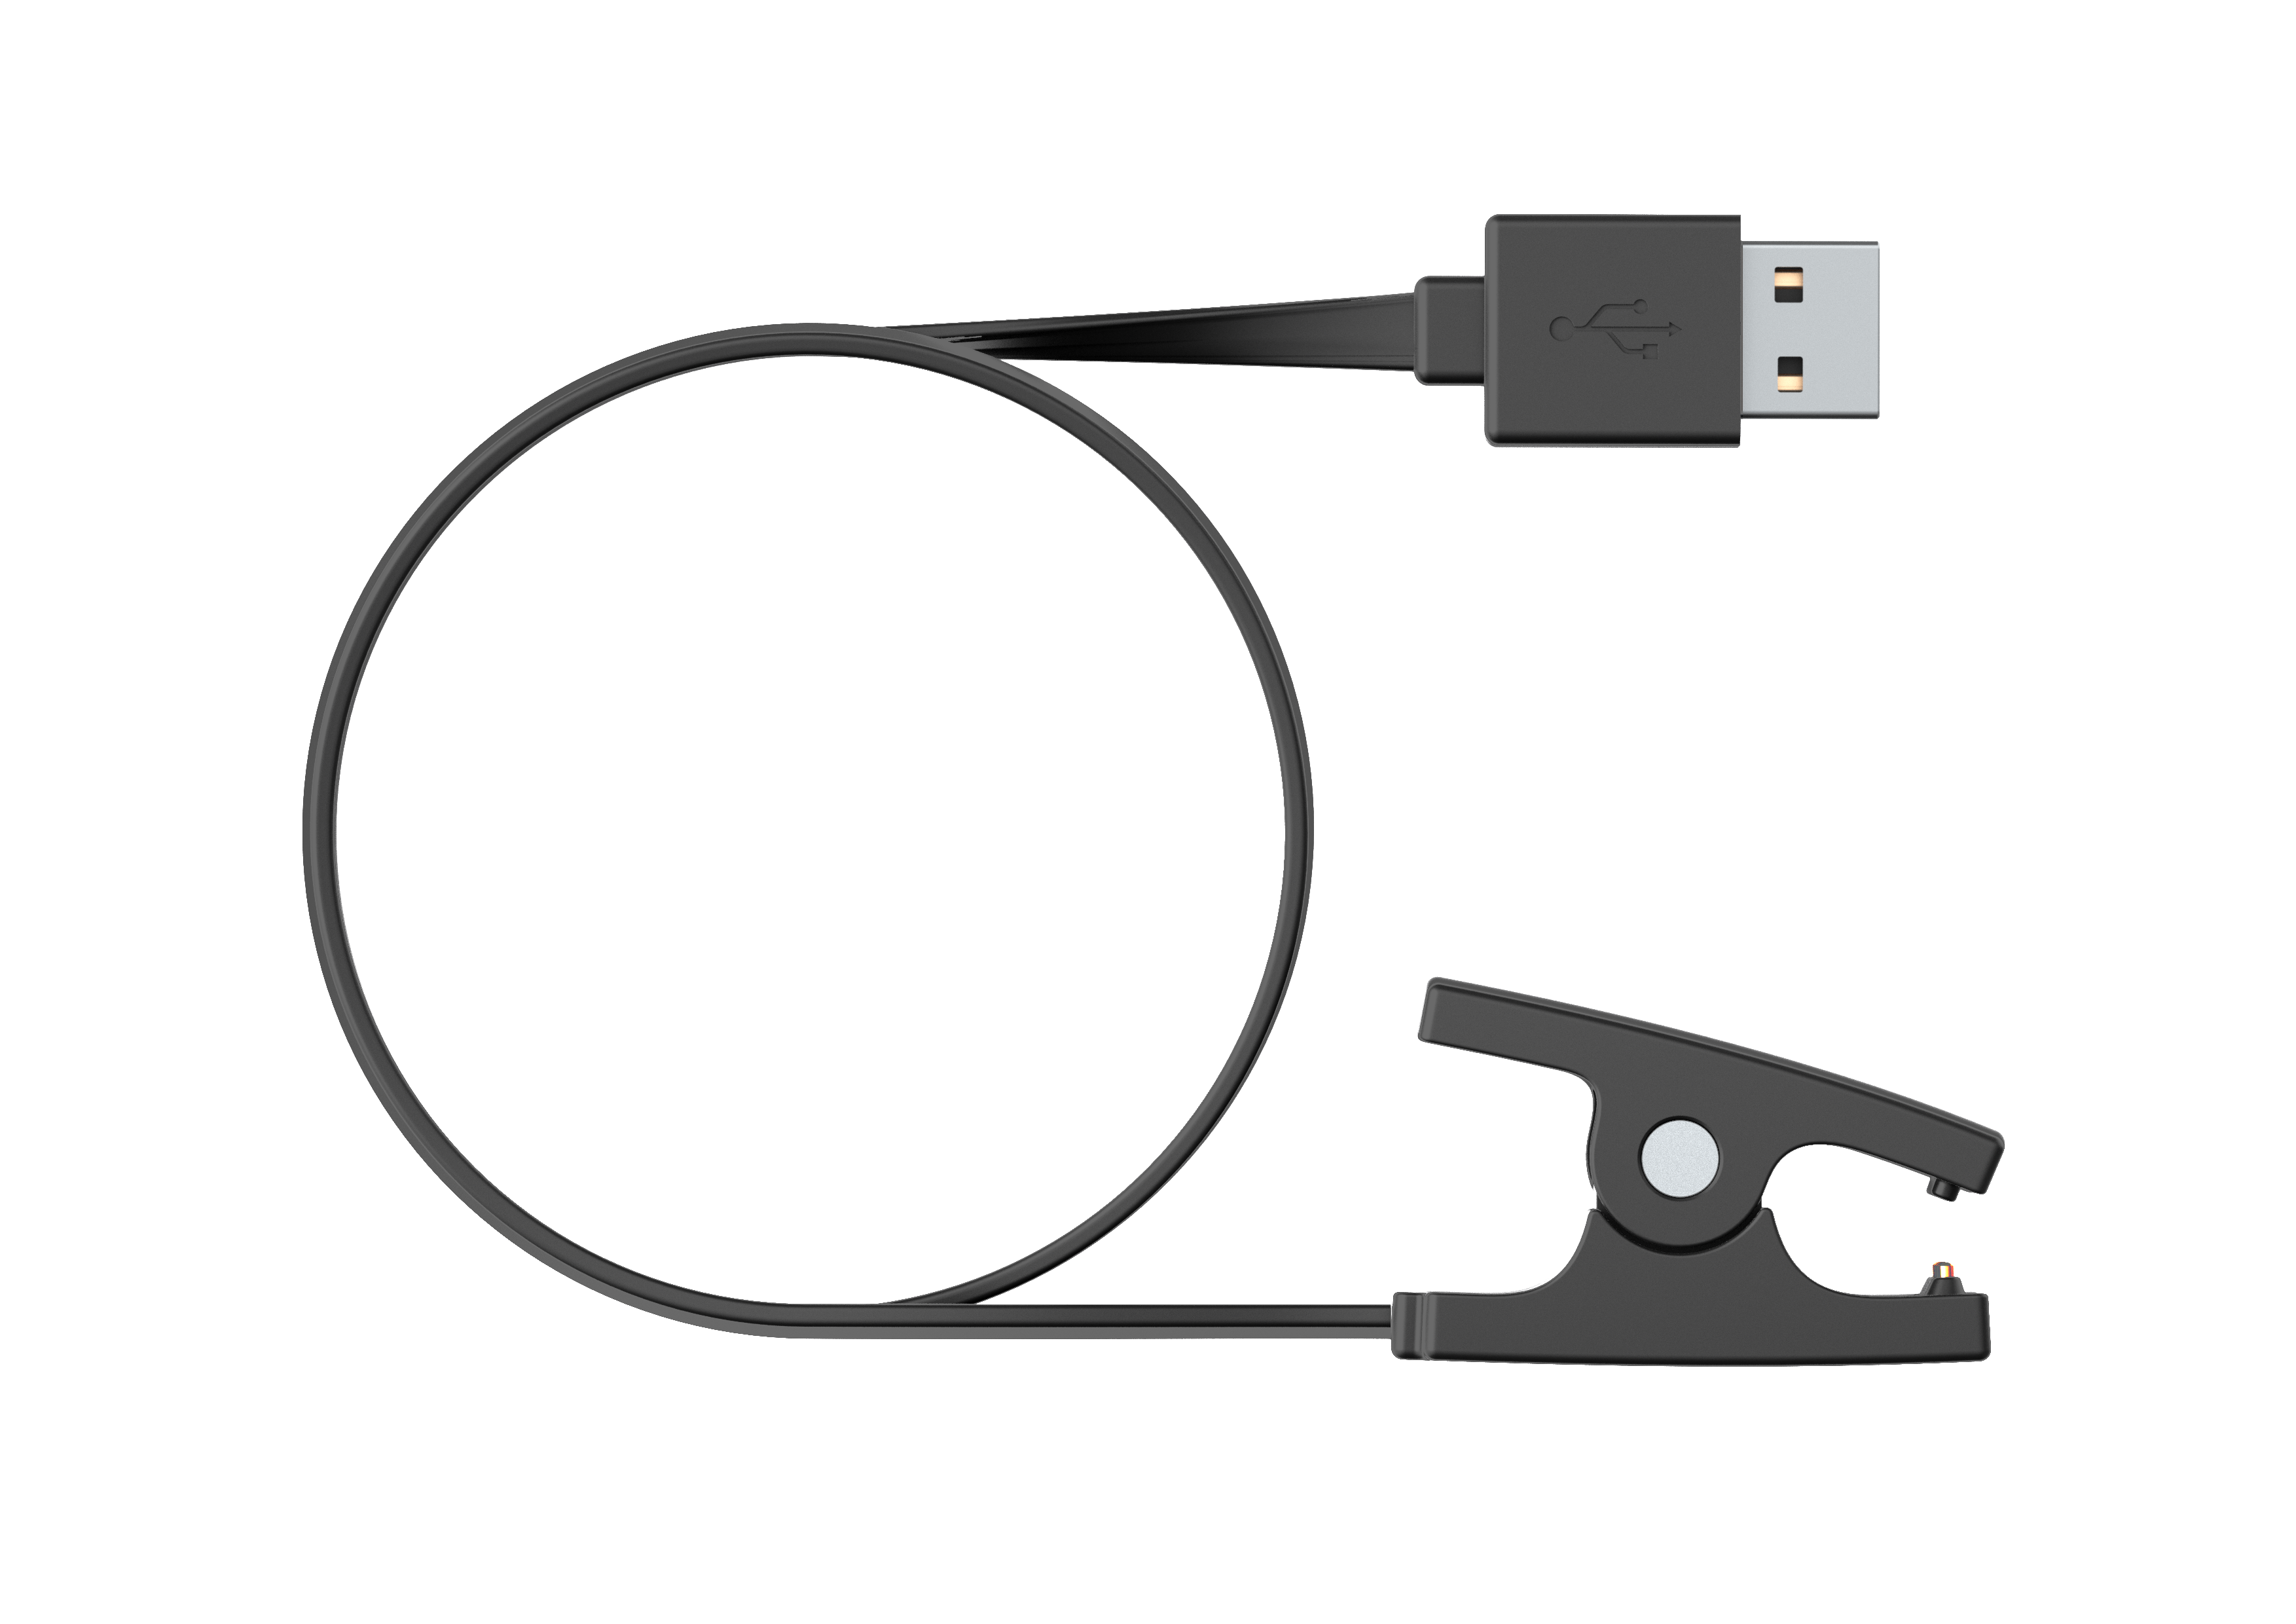 Polair Variant glas USB Power Cable – Charge and update your Suunto watch